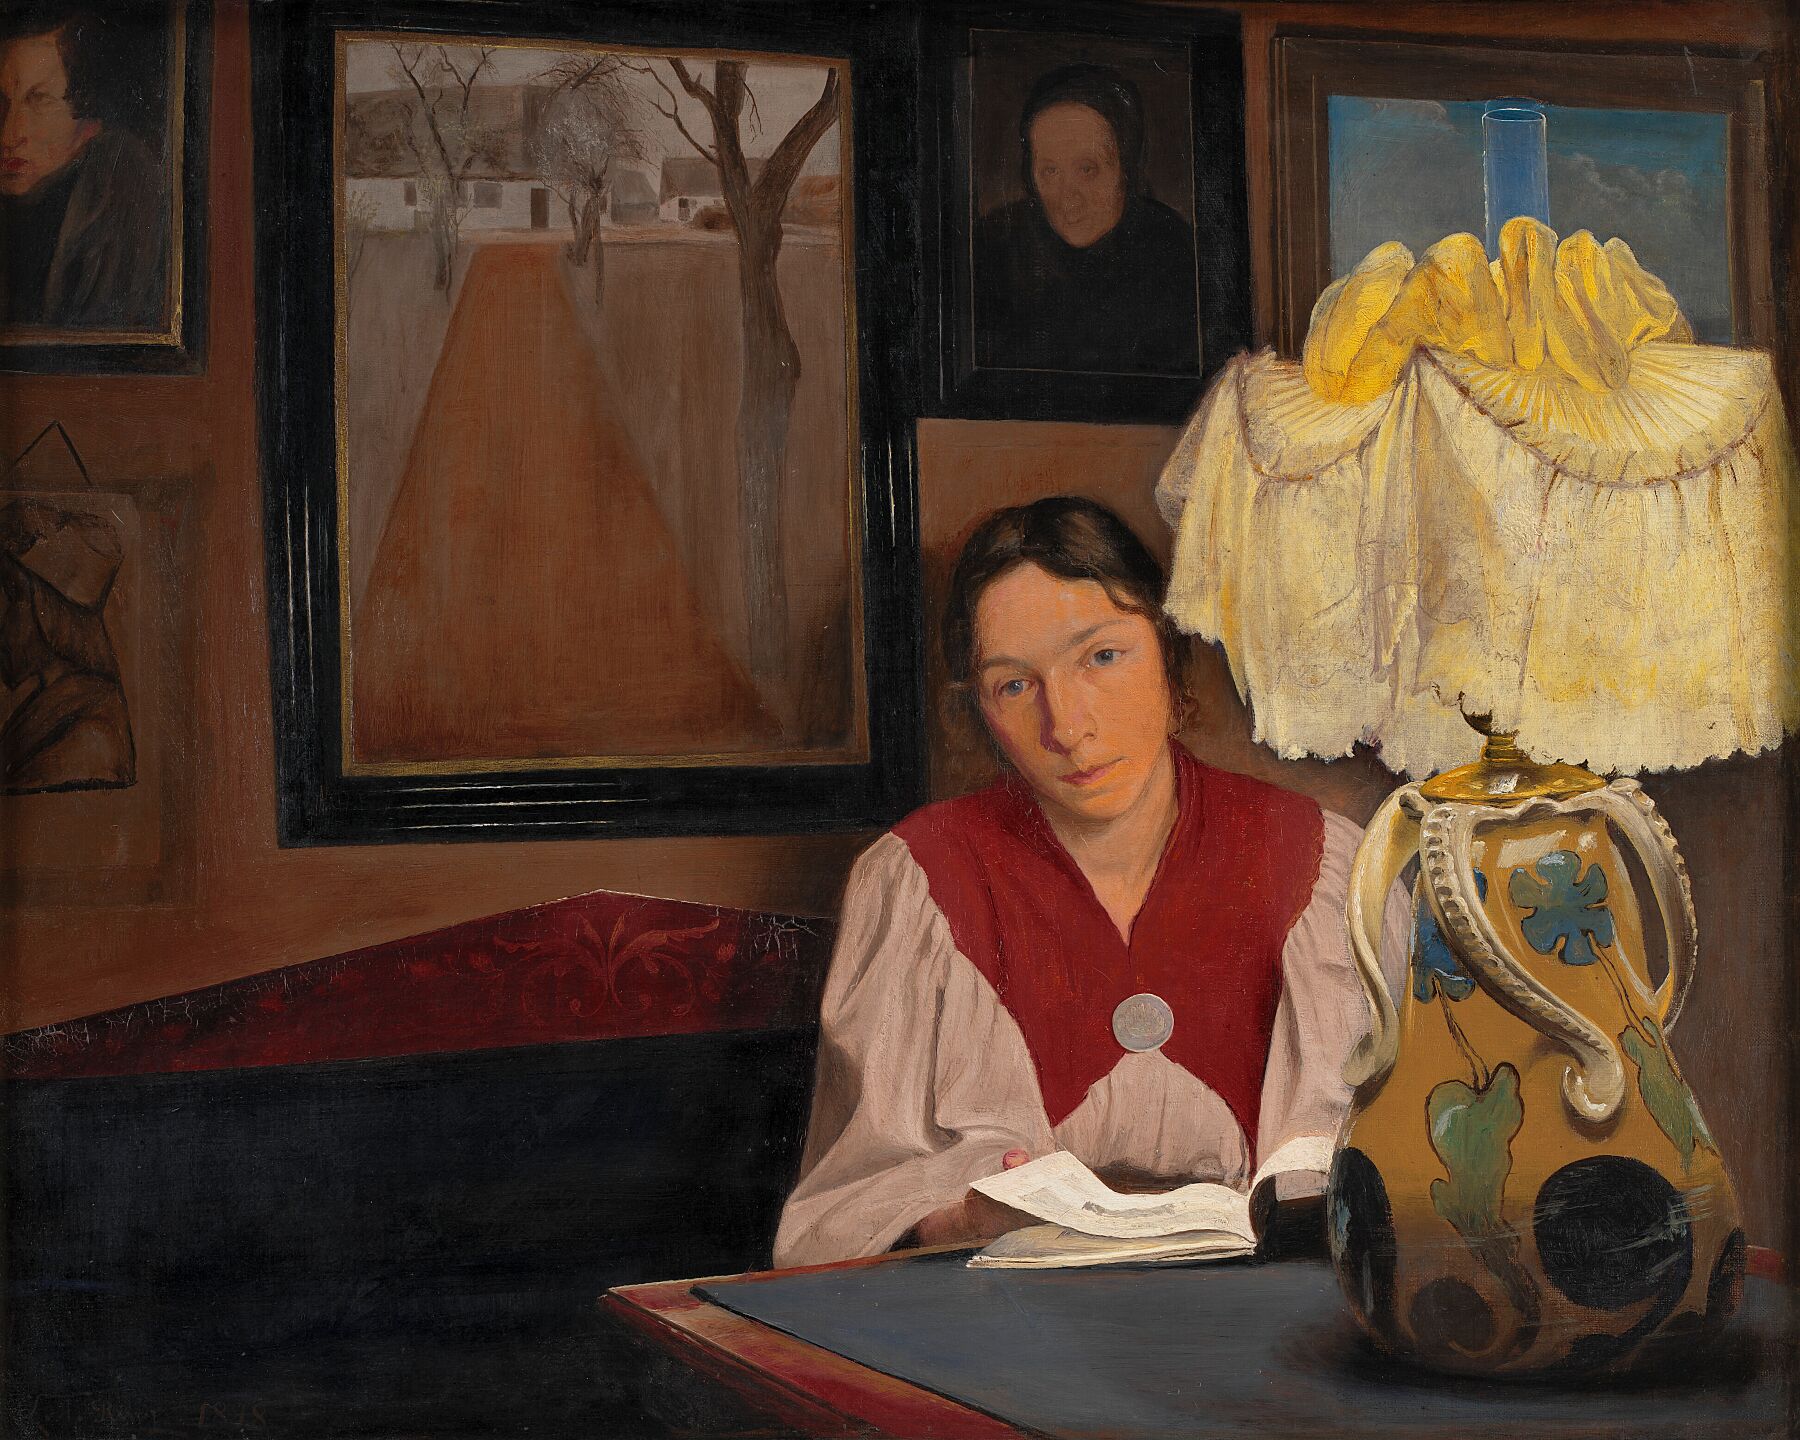 The Artist's Wife by Lamplight by L.A. Ring - 1898